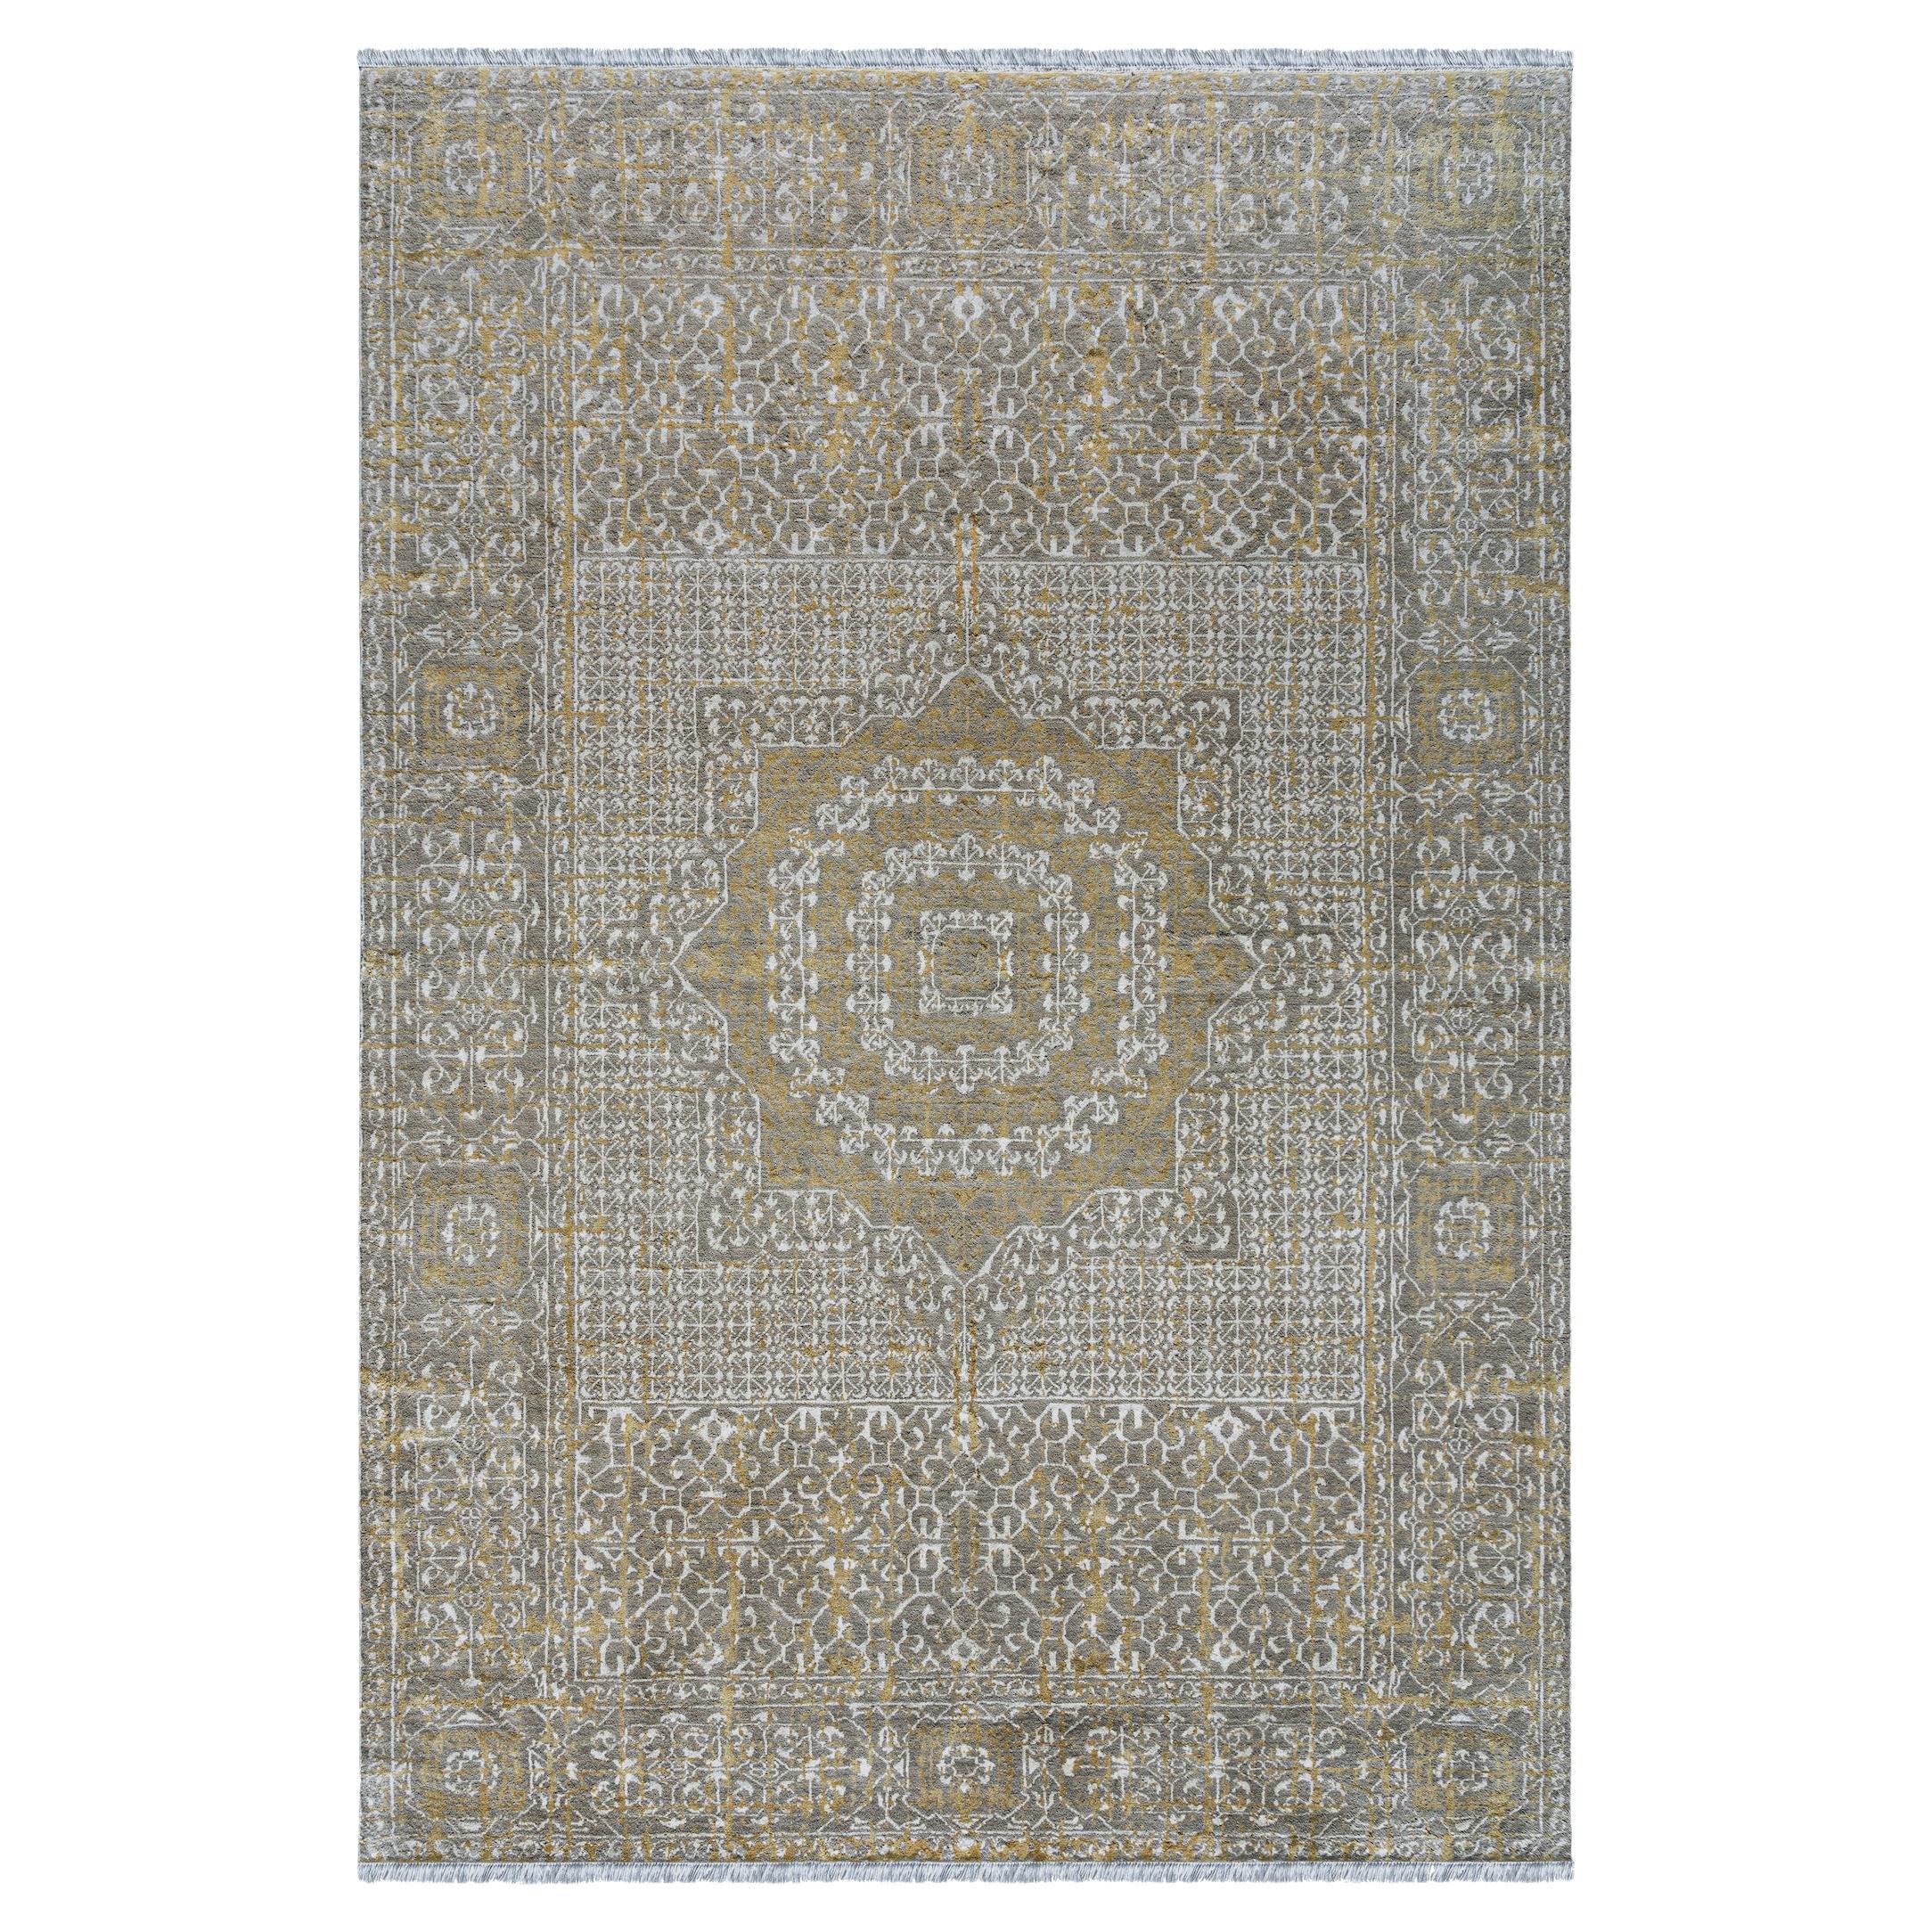 Kahhal Looms Mamluk Medallion Infused "Gold" Hand-Knotted 350x250 Rug